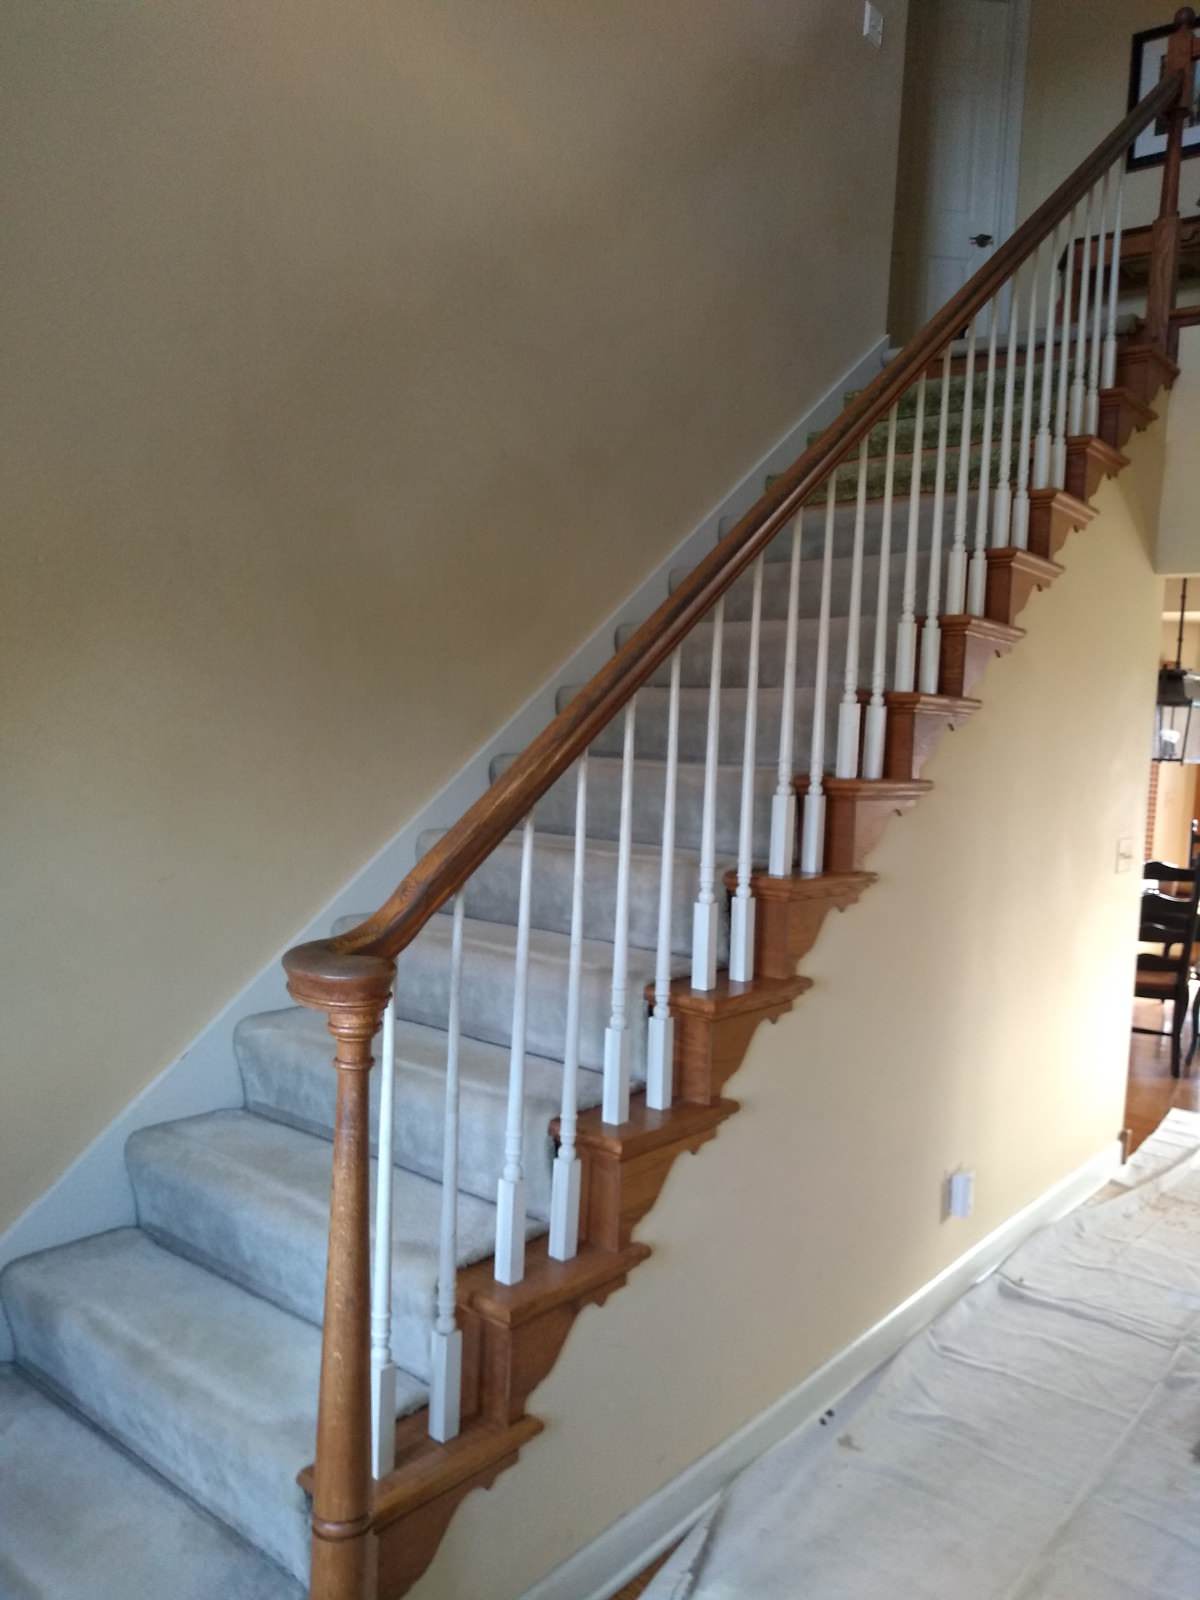 Staircase revitalized